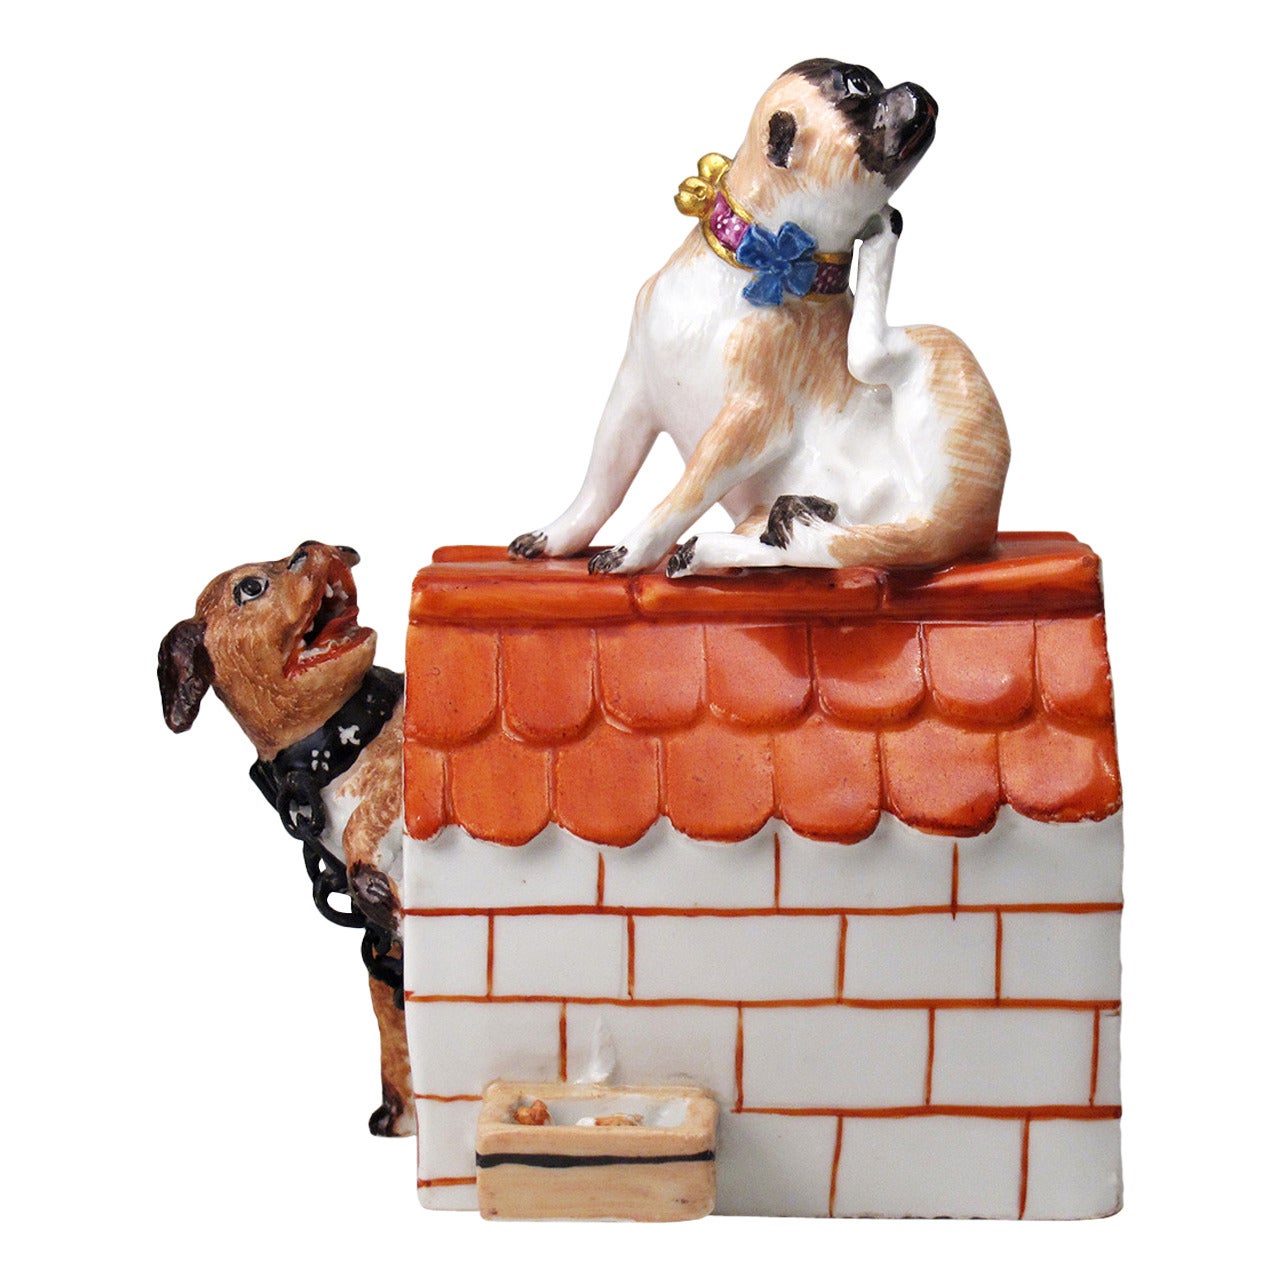 Meissen Group of a Dog House, circa 1740